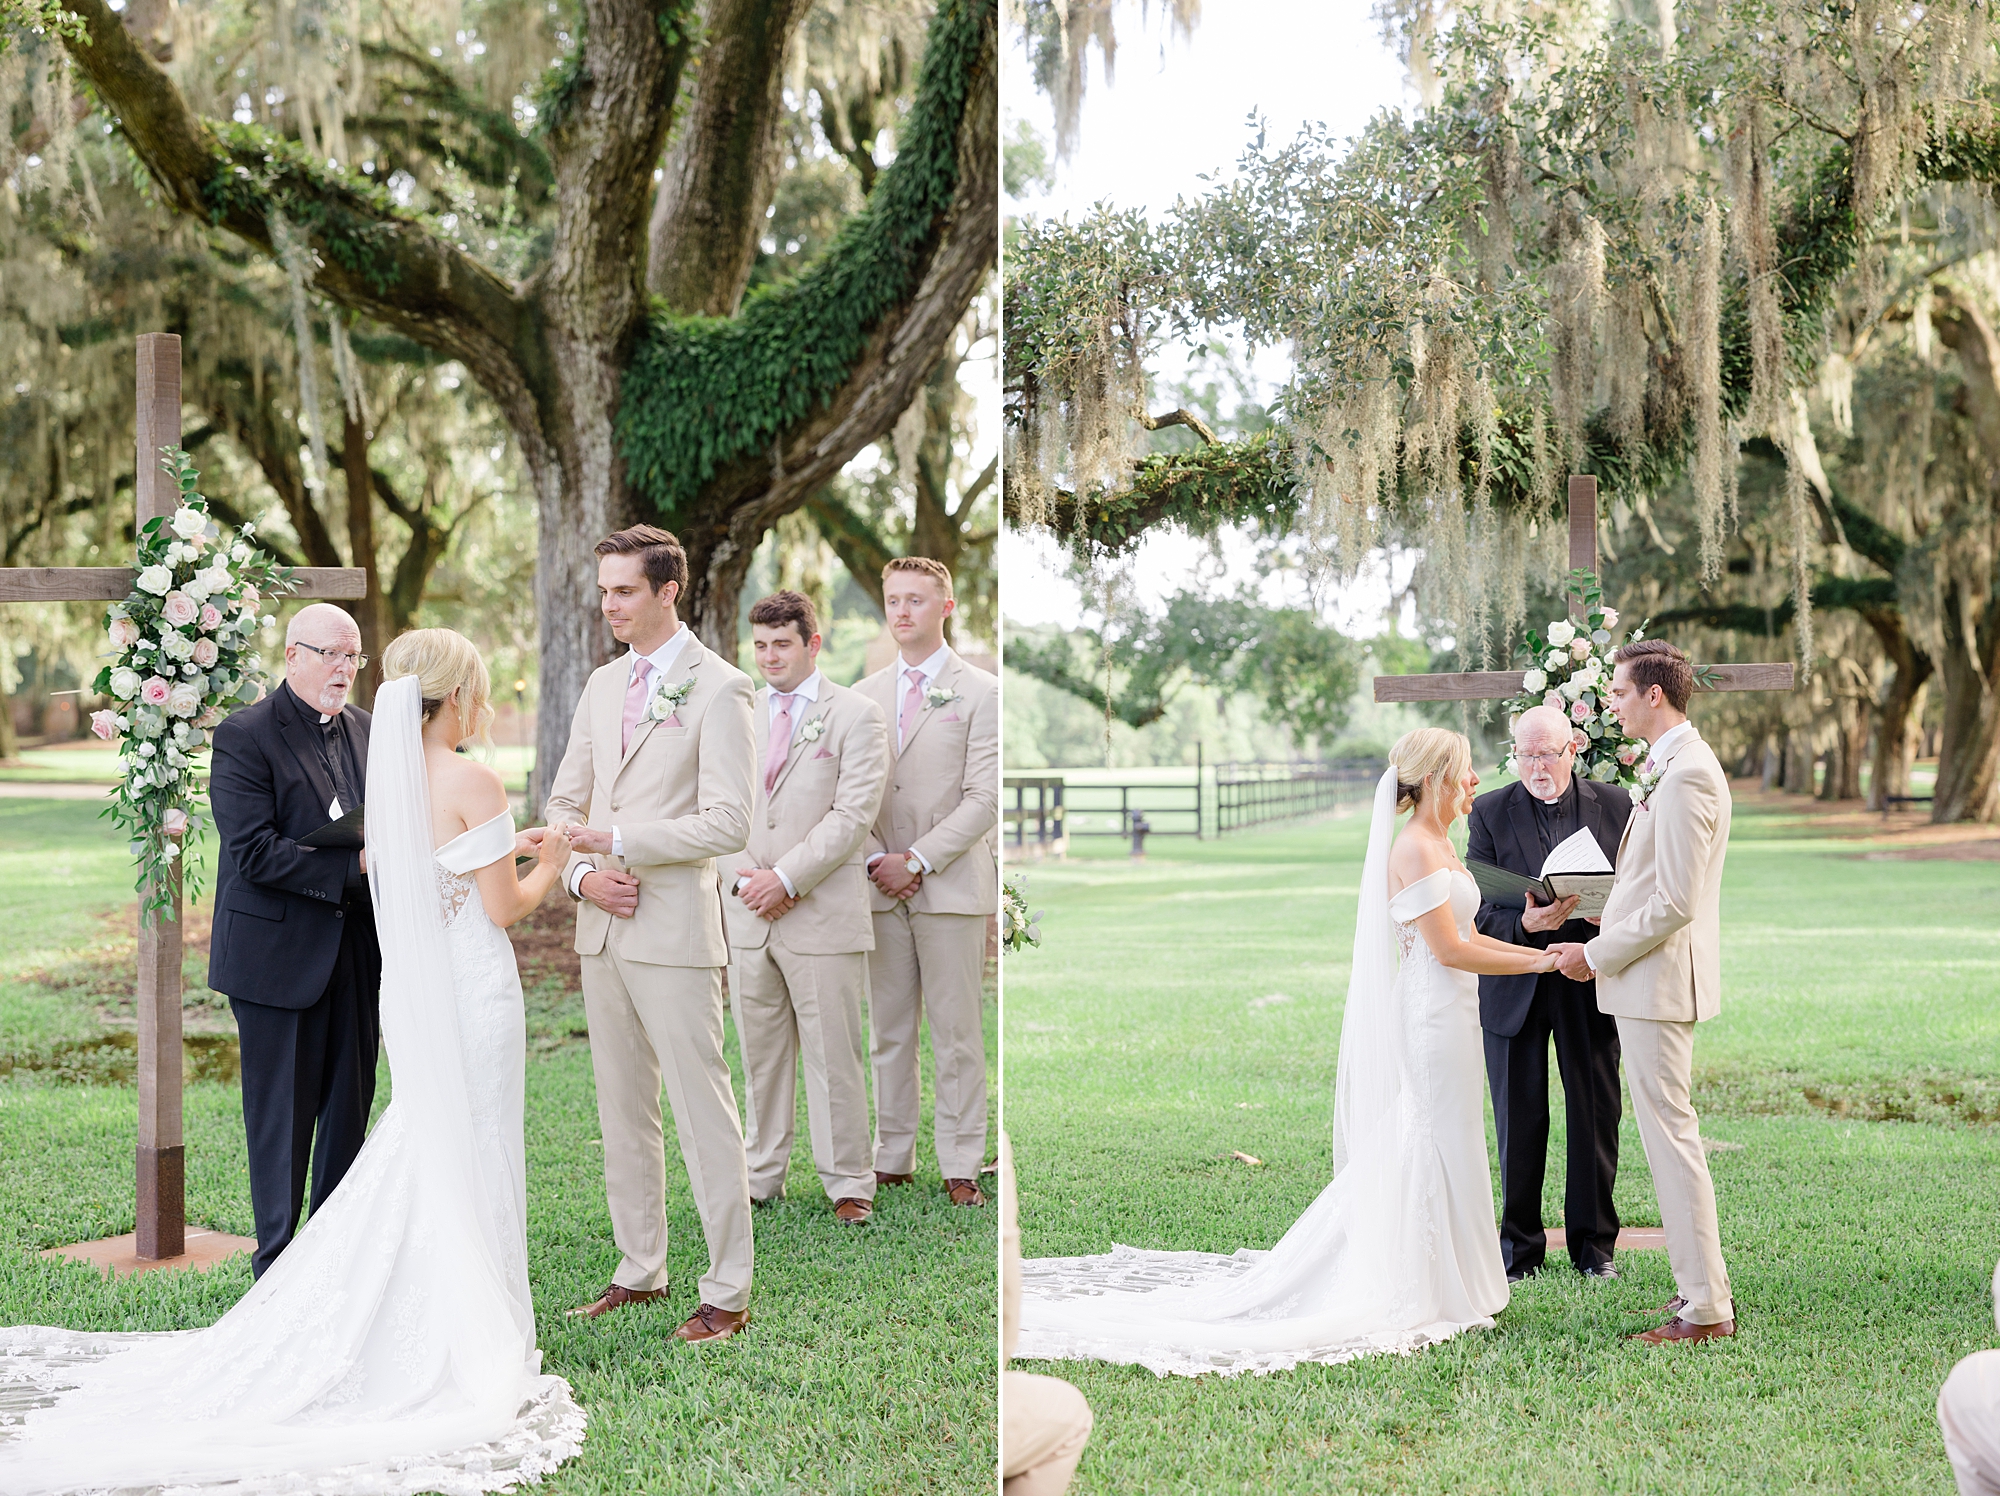 newlyweds exchange vows during wedding ceremony under oak trees at Boone Hall